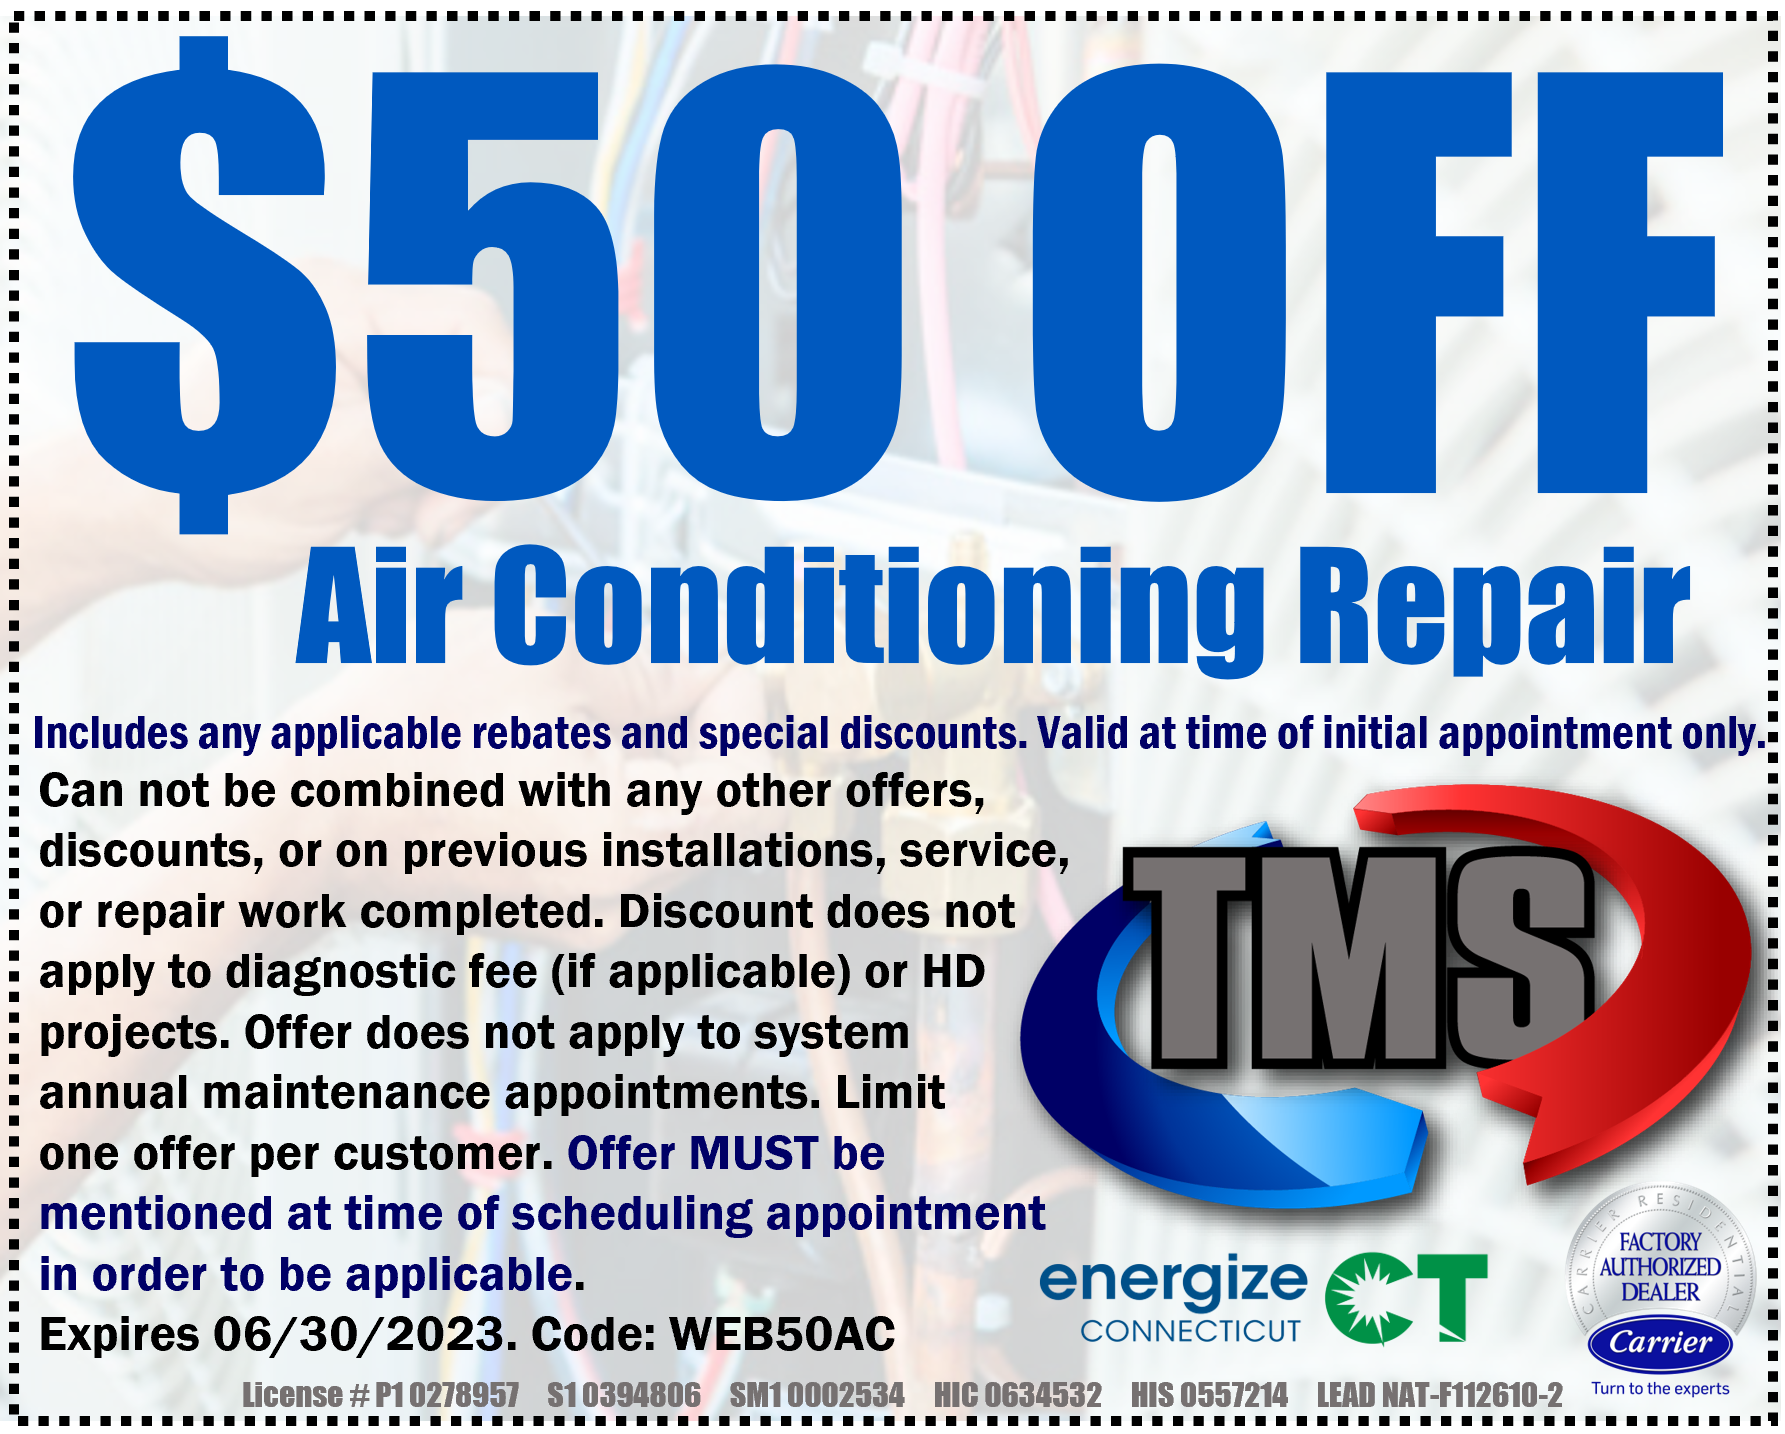 $50 OFF AIR CONDITIONING REPAIR SERVICE COOLING